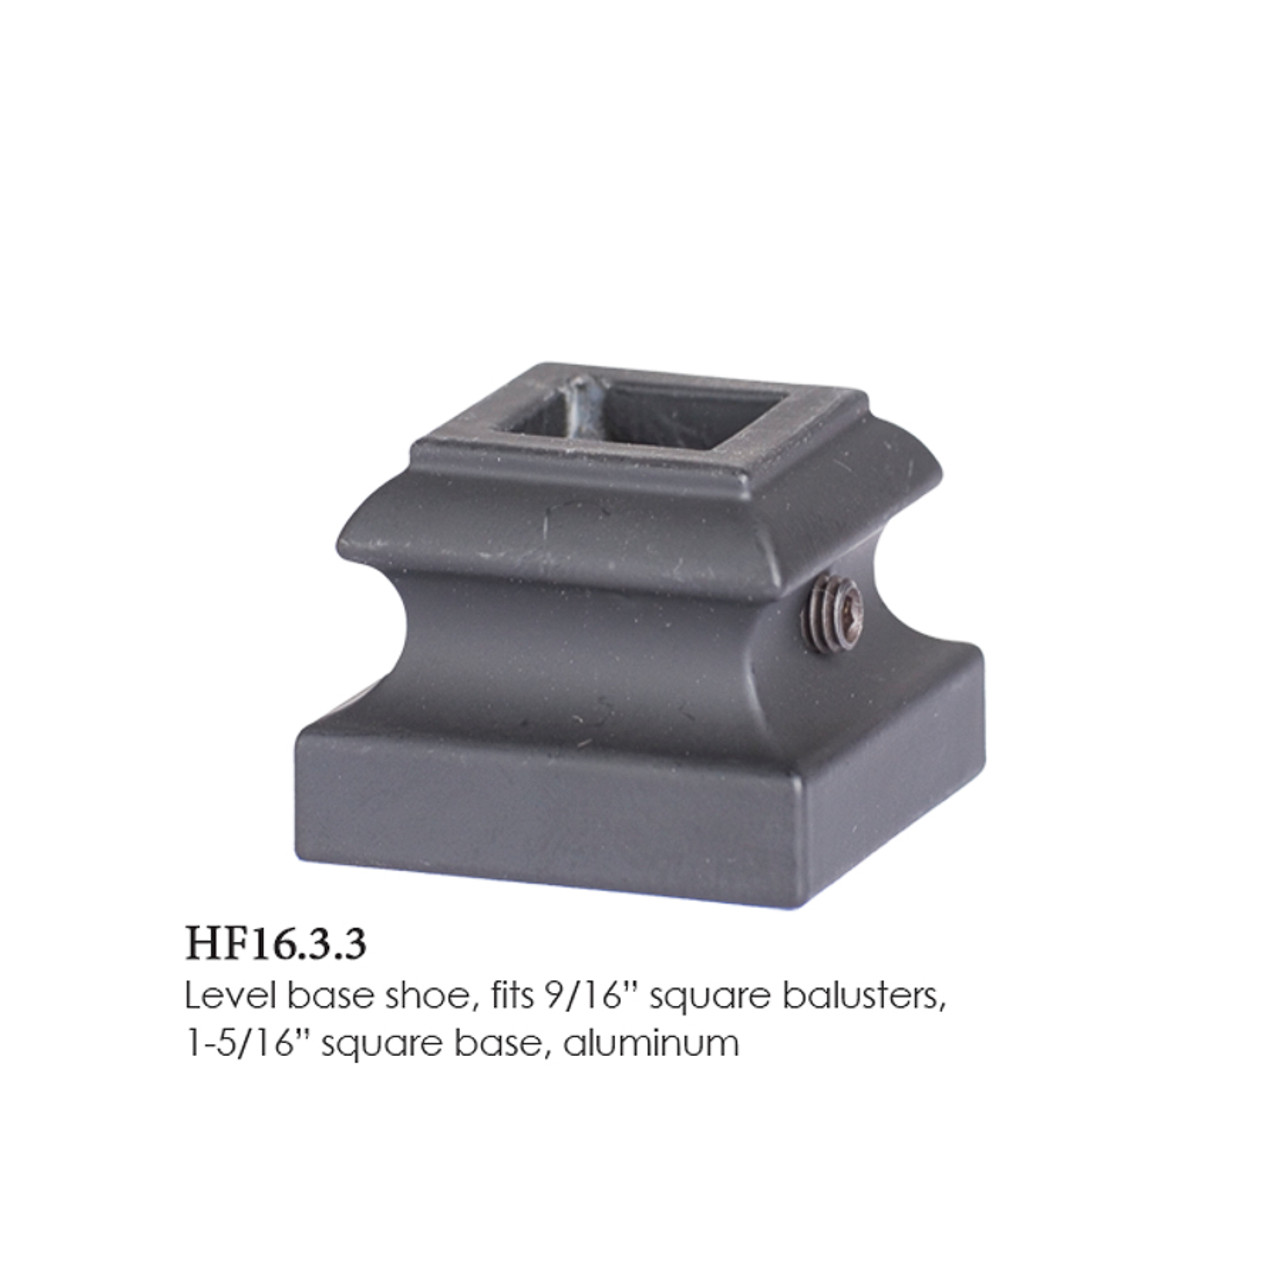 HF 16.3.3 Flat Shoe for 14mm Balusters (9/16")